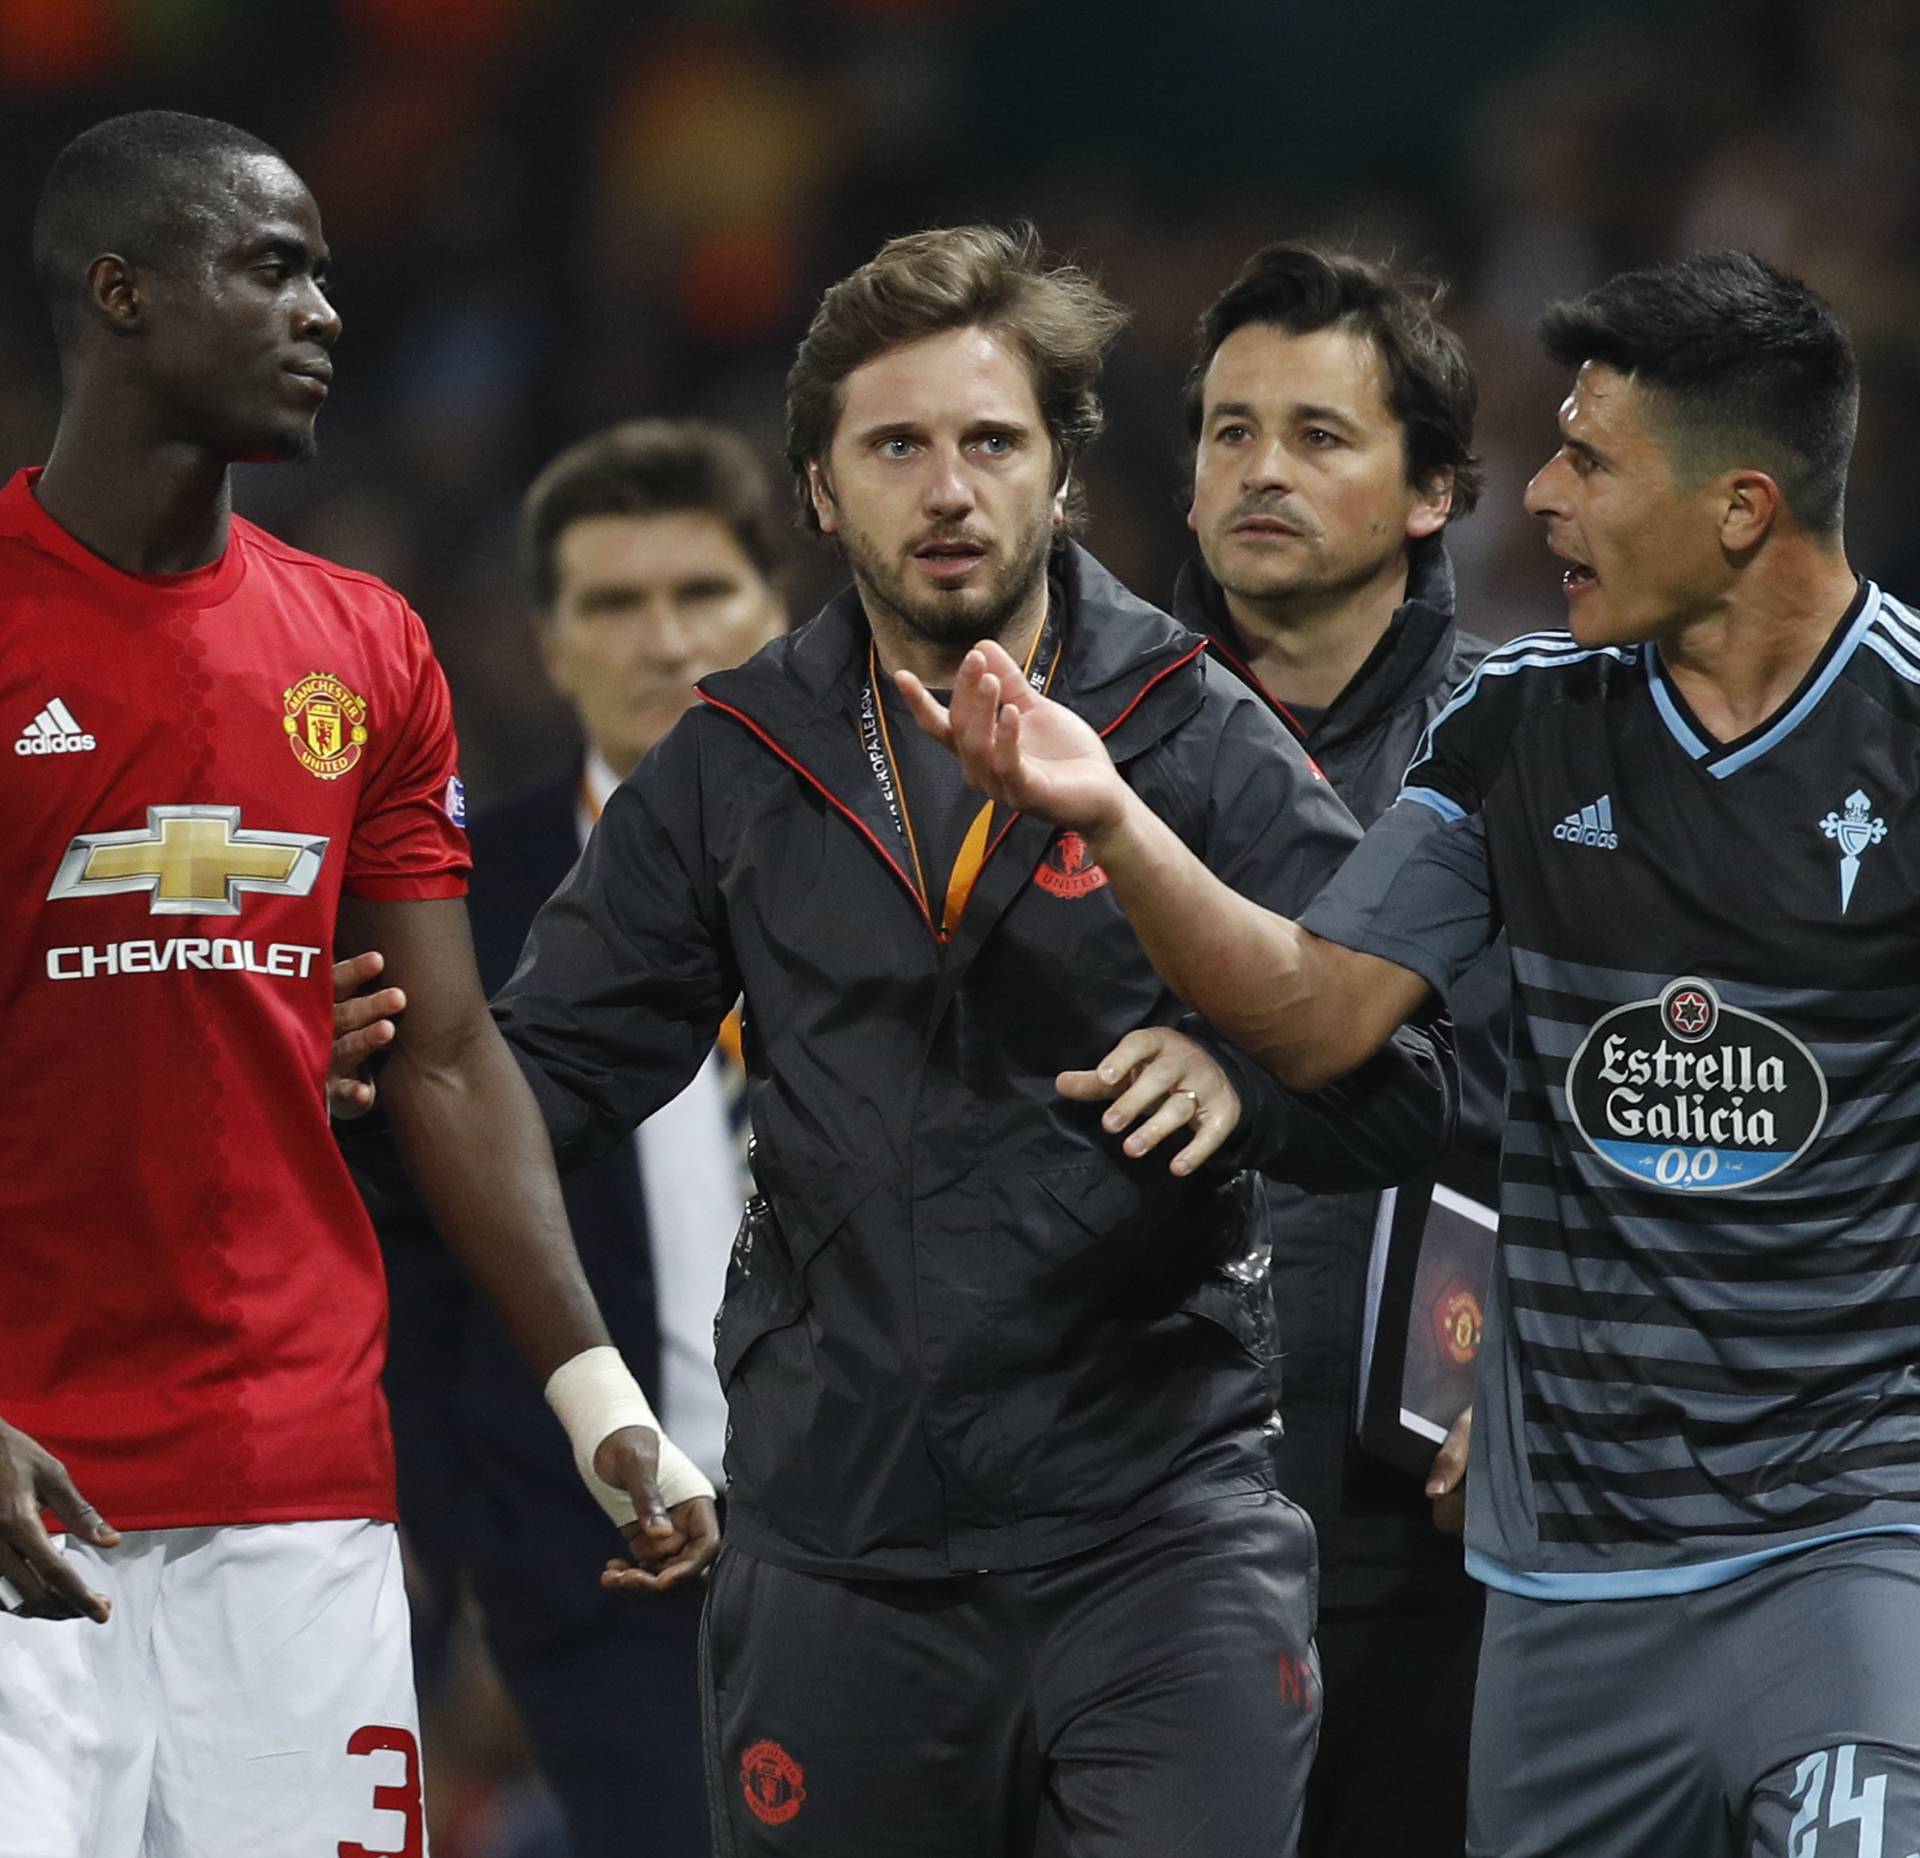 Manchester United's Eric Bailly clashes with Celta Vigo's Facundo Roncaglia after both are sent off